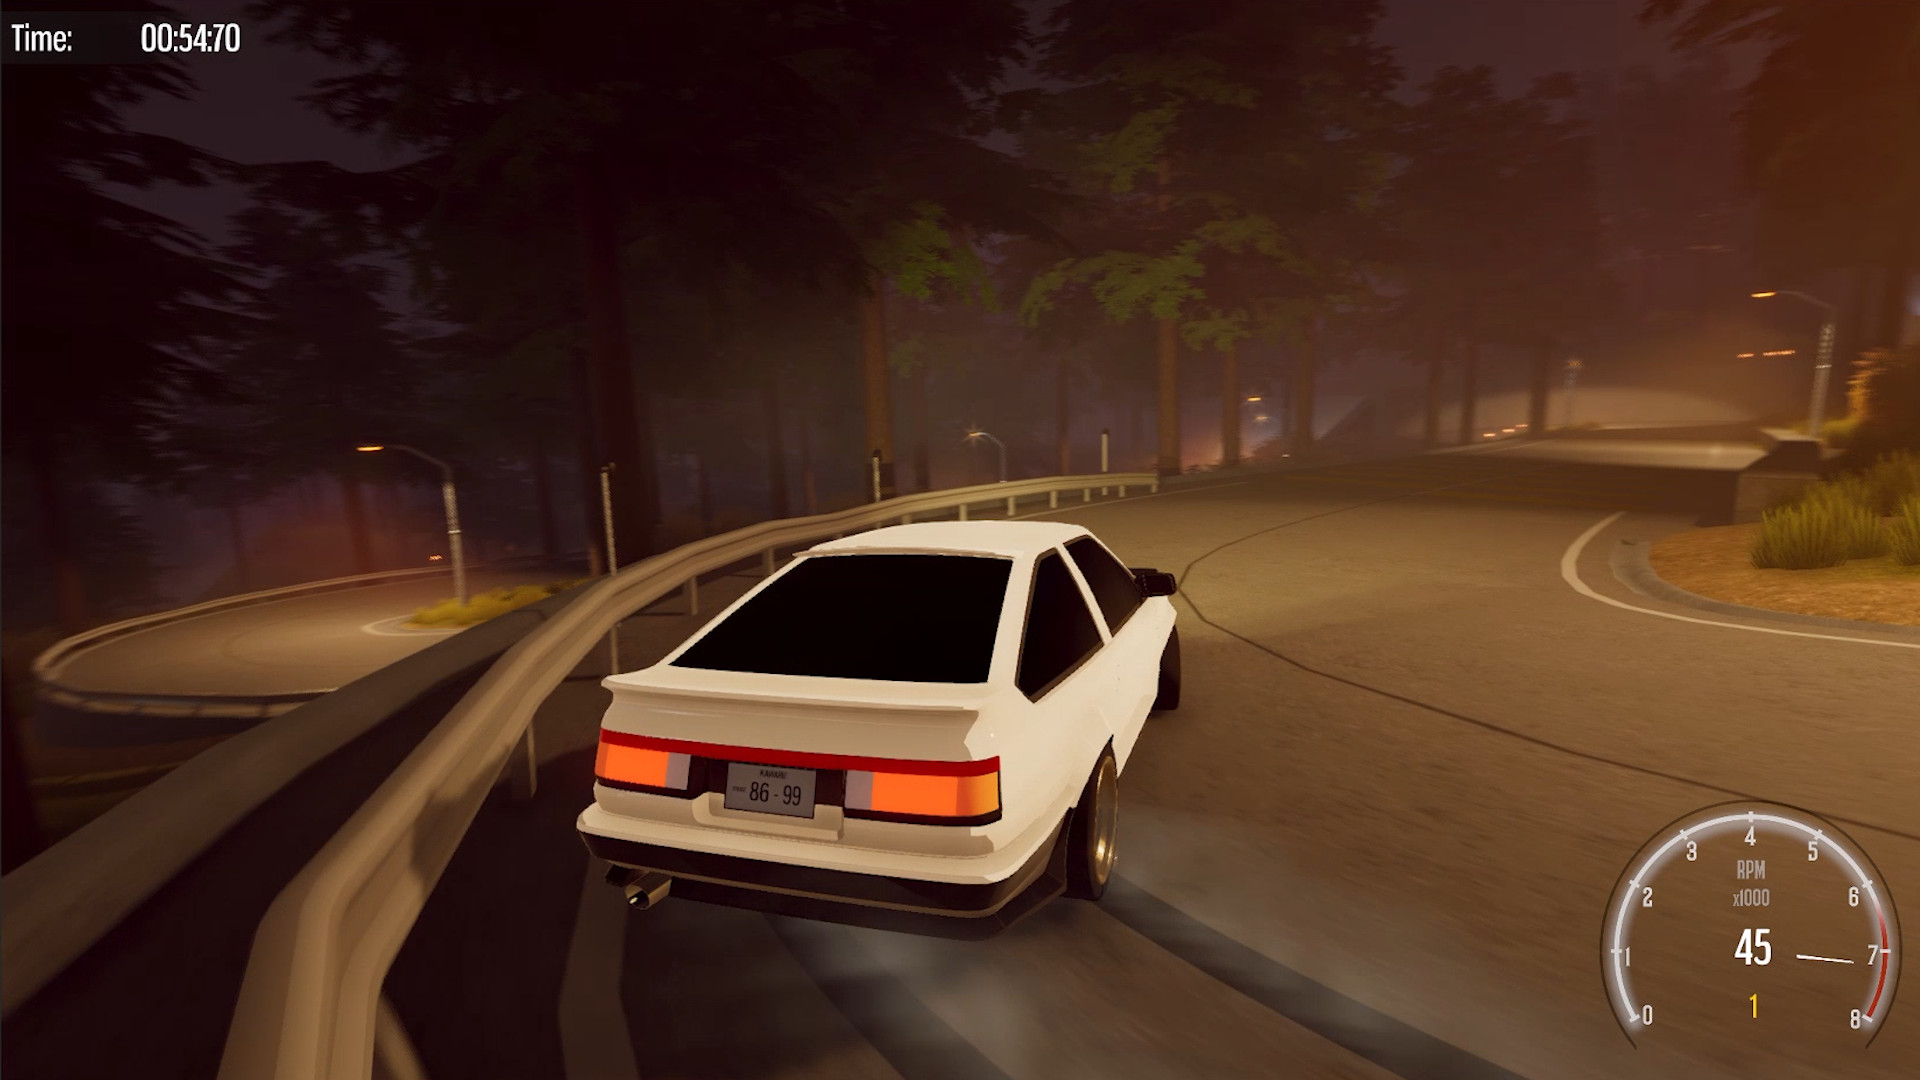 Midnight Driver Free Download